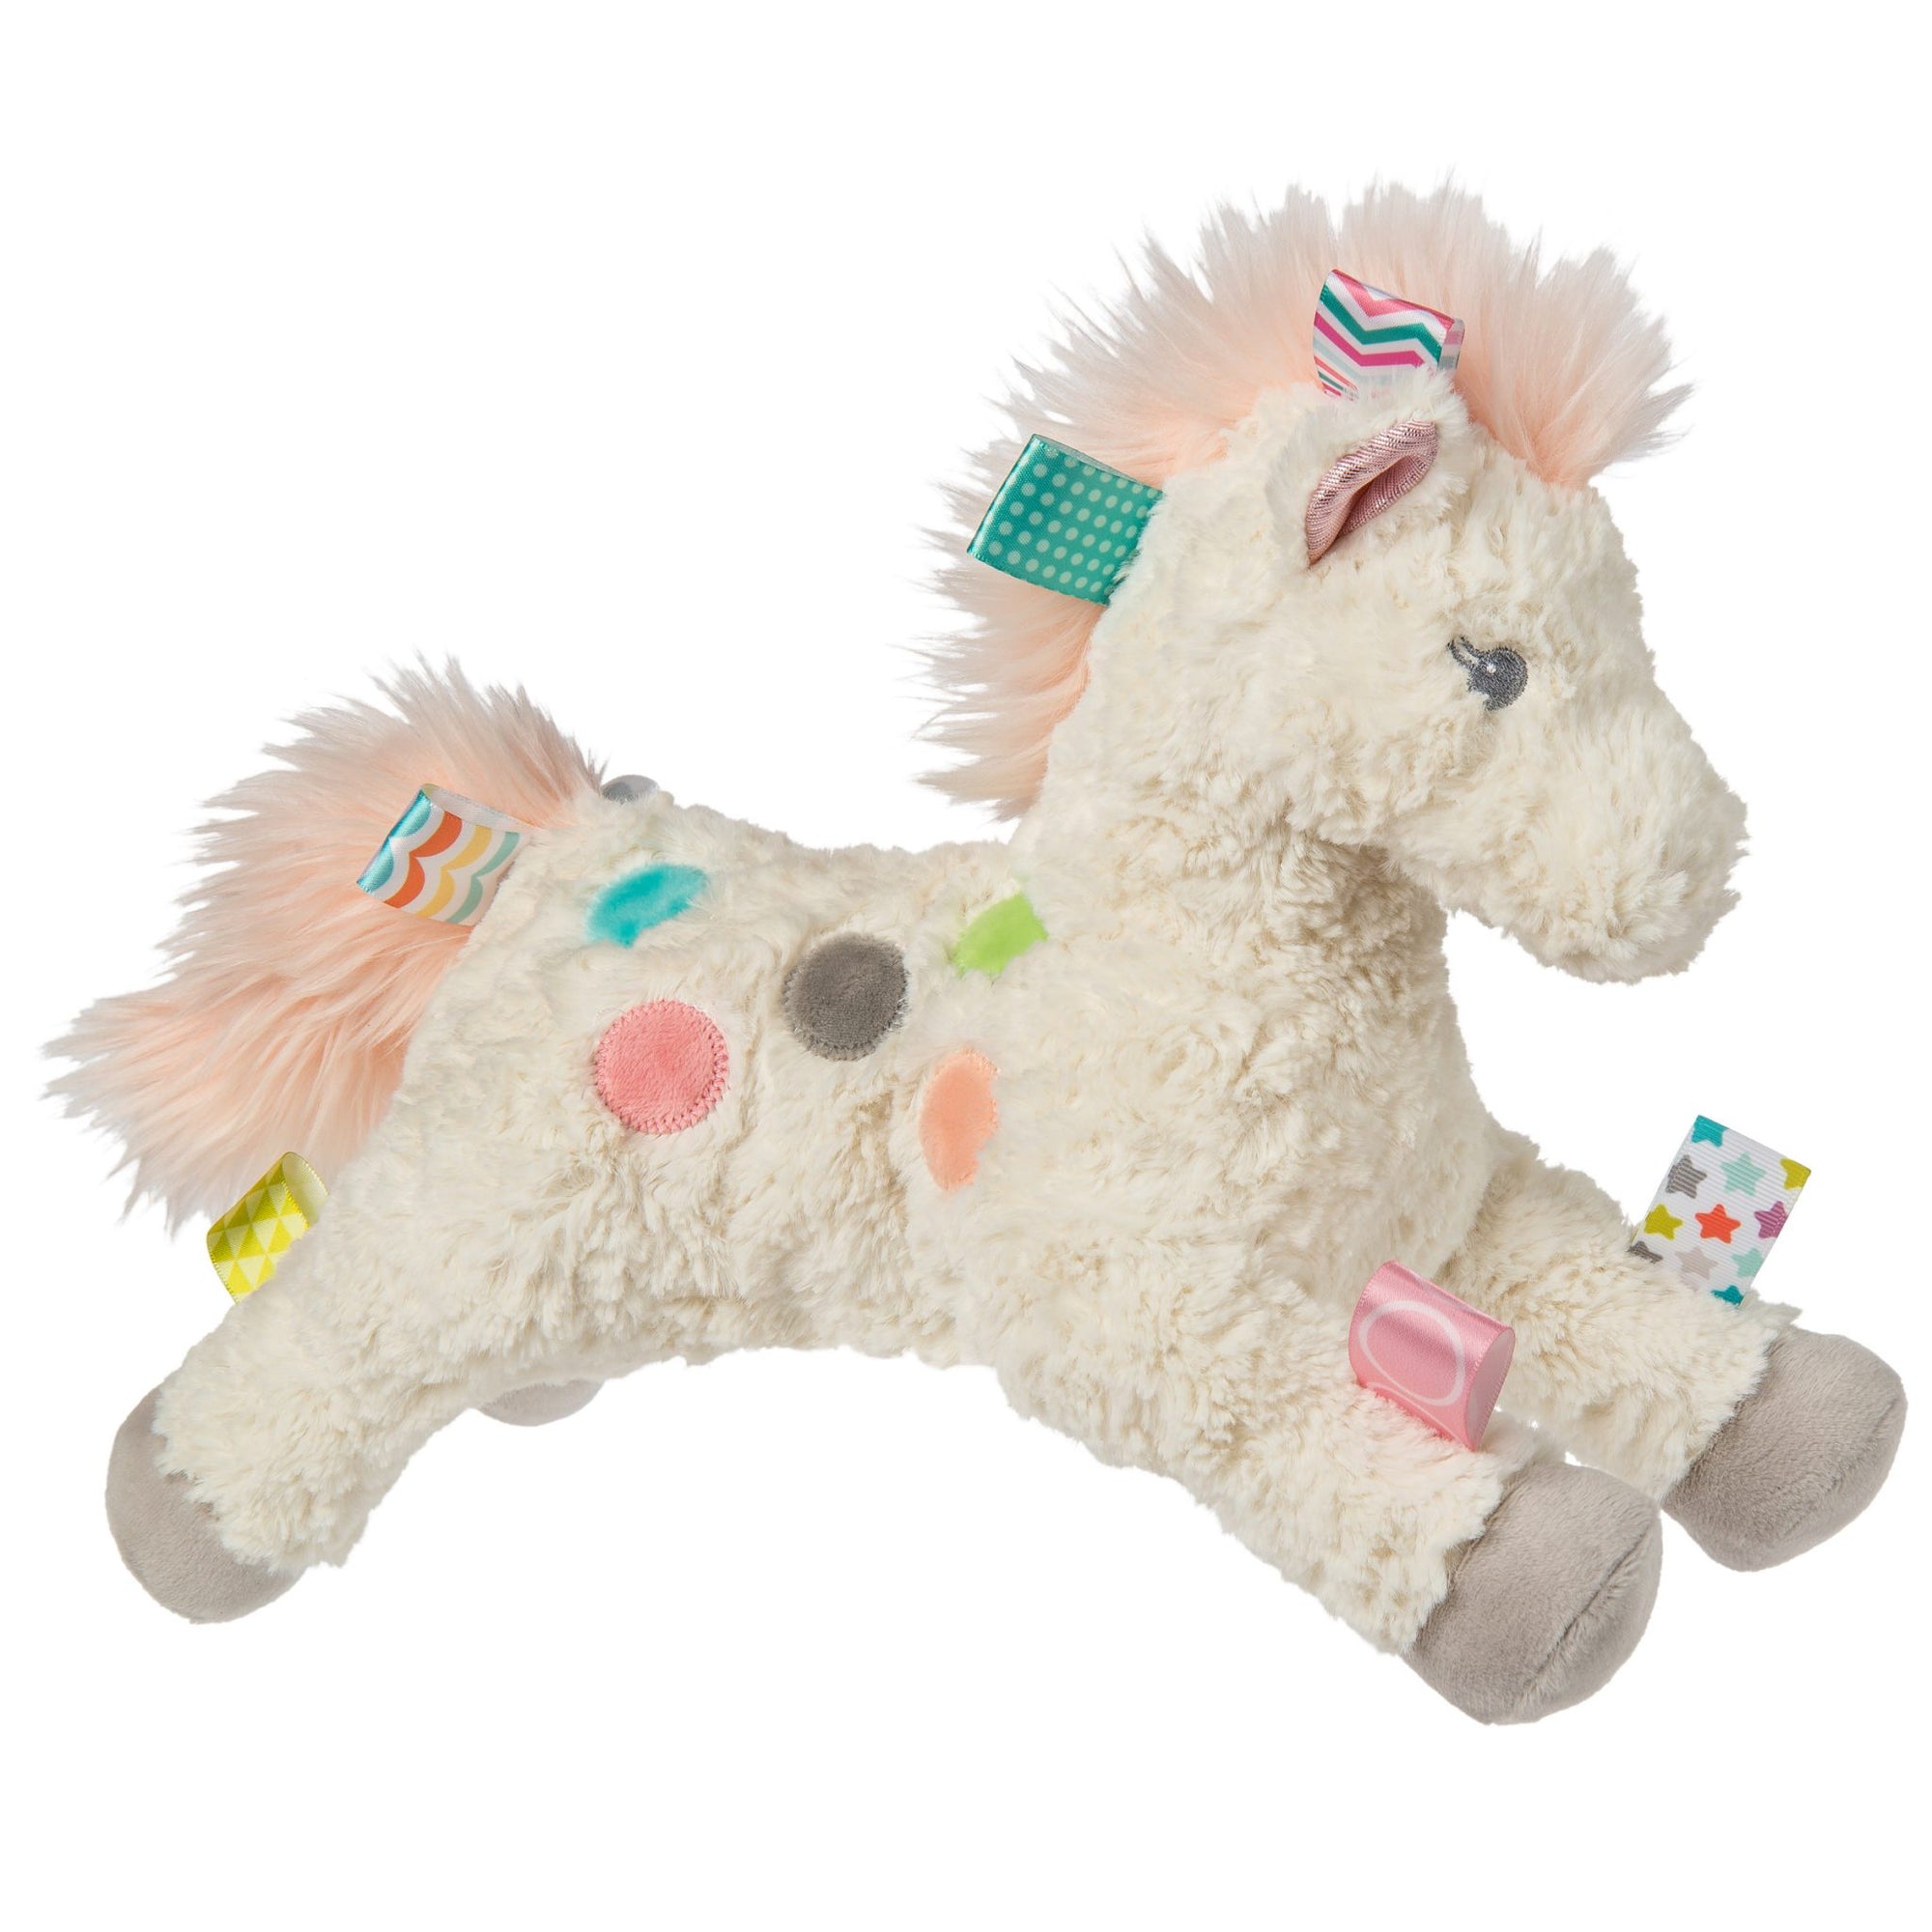 Taggie's Painted Pony Soft Toy